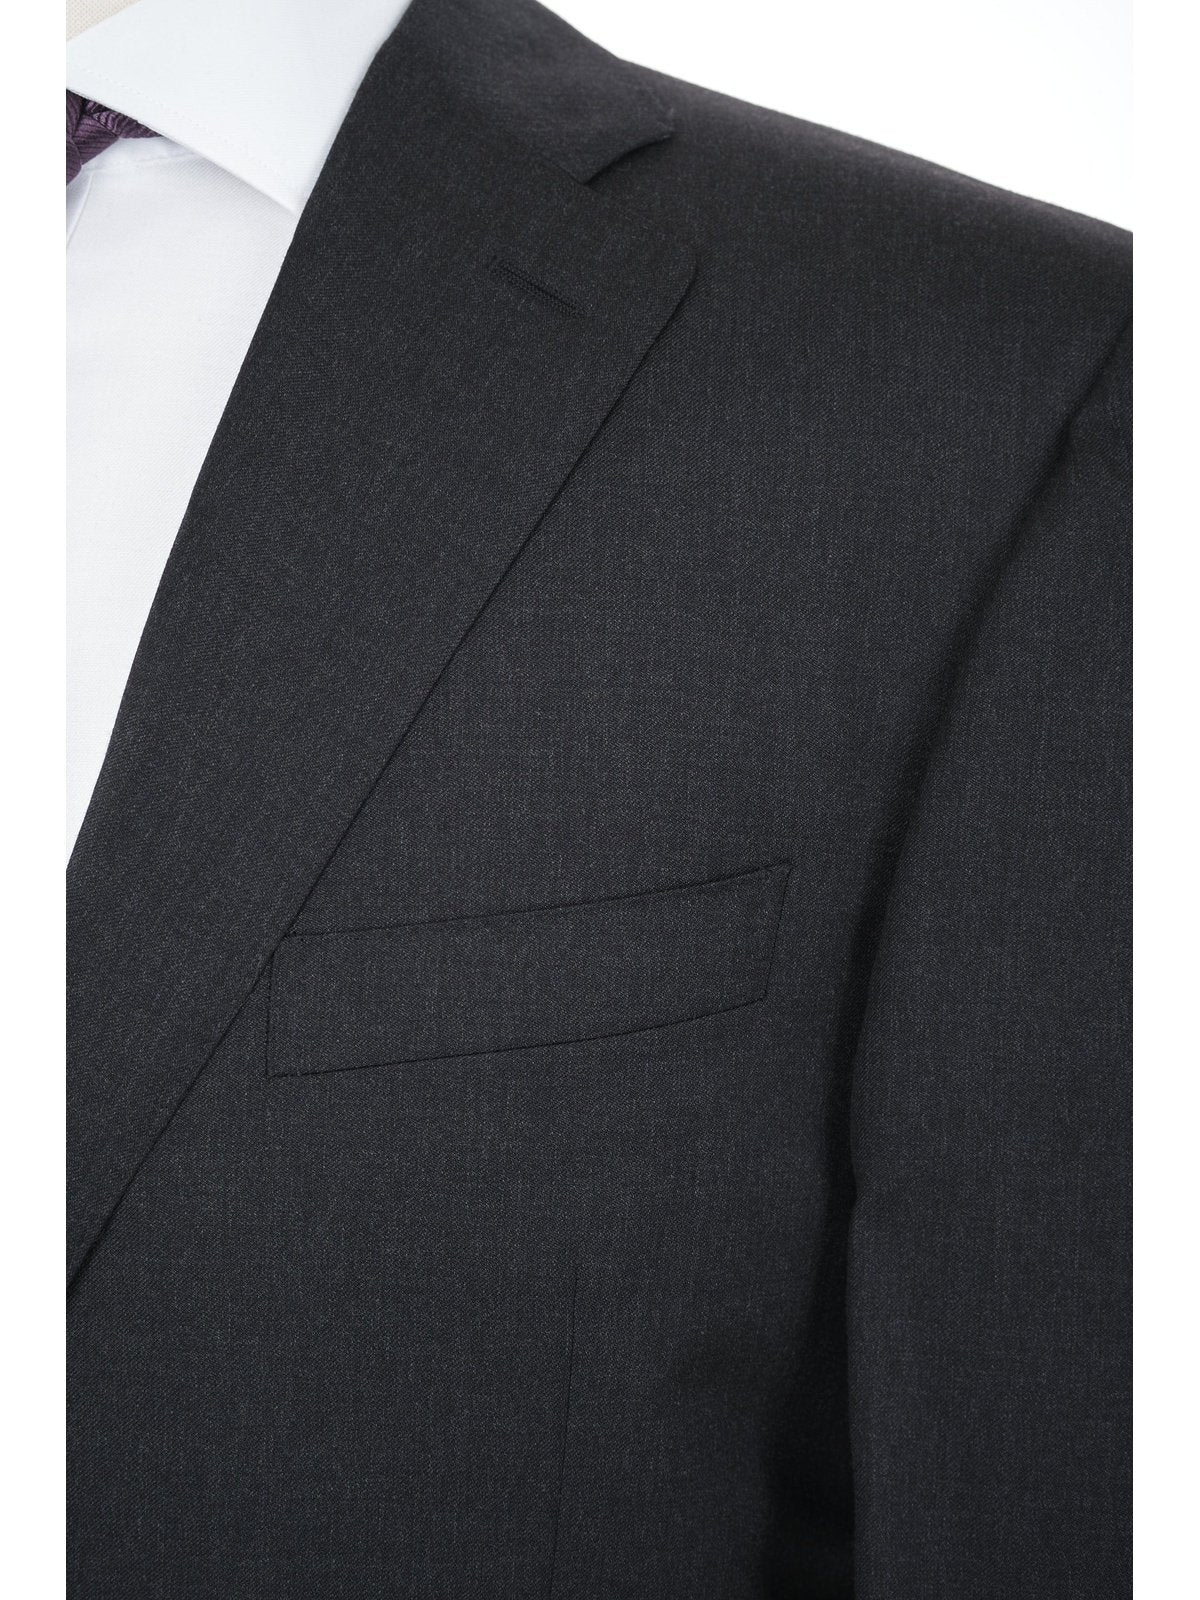 Canali 1934 Mens Solid Charcoal Gray 44R Drop 7 100% Wool 2 Piece Suit